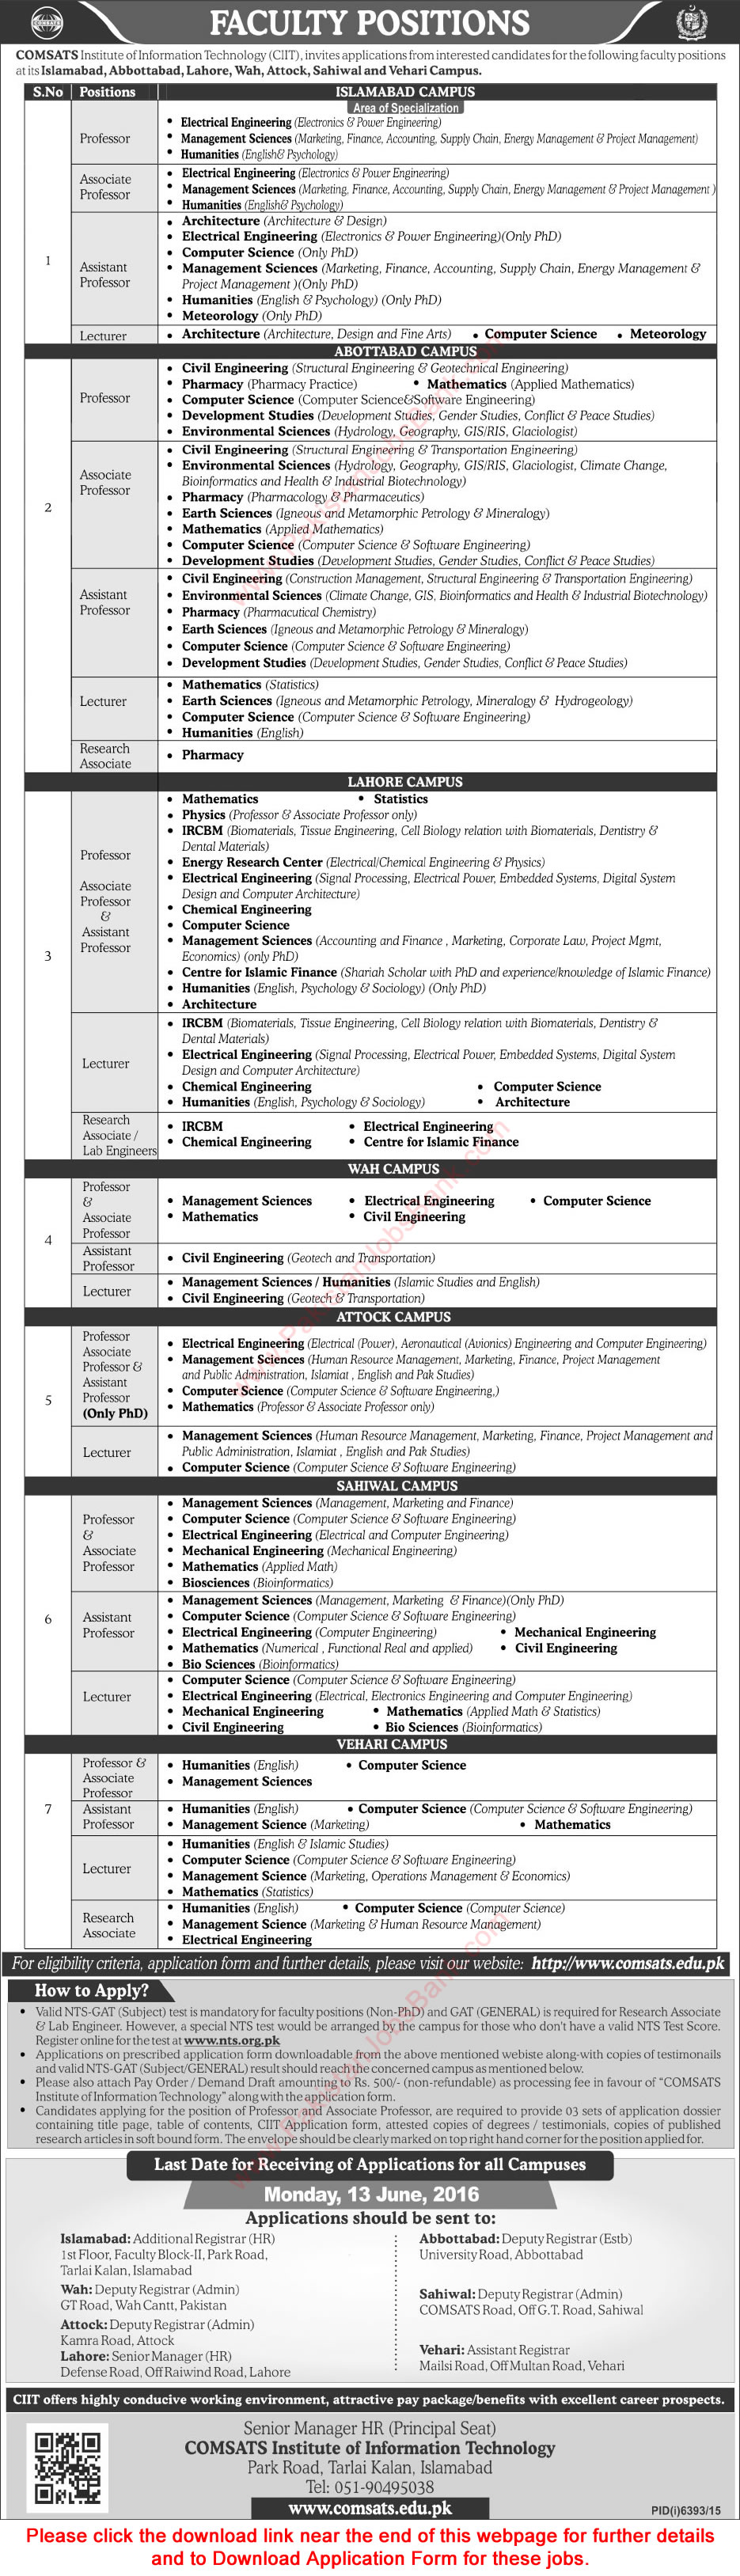 COMSATS Jobs May 2016 June CIIT Application Form Teaching Faculty, Research Associate & Lab Engineers Latest